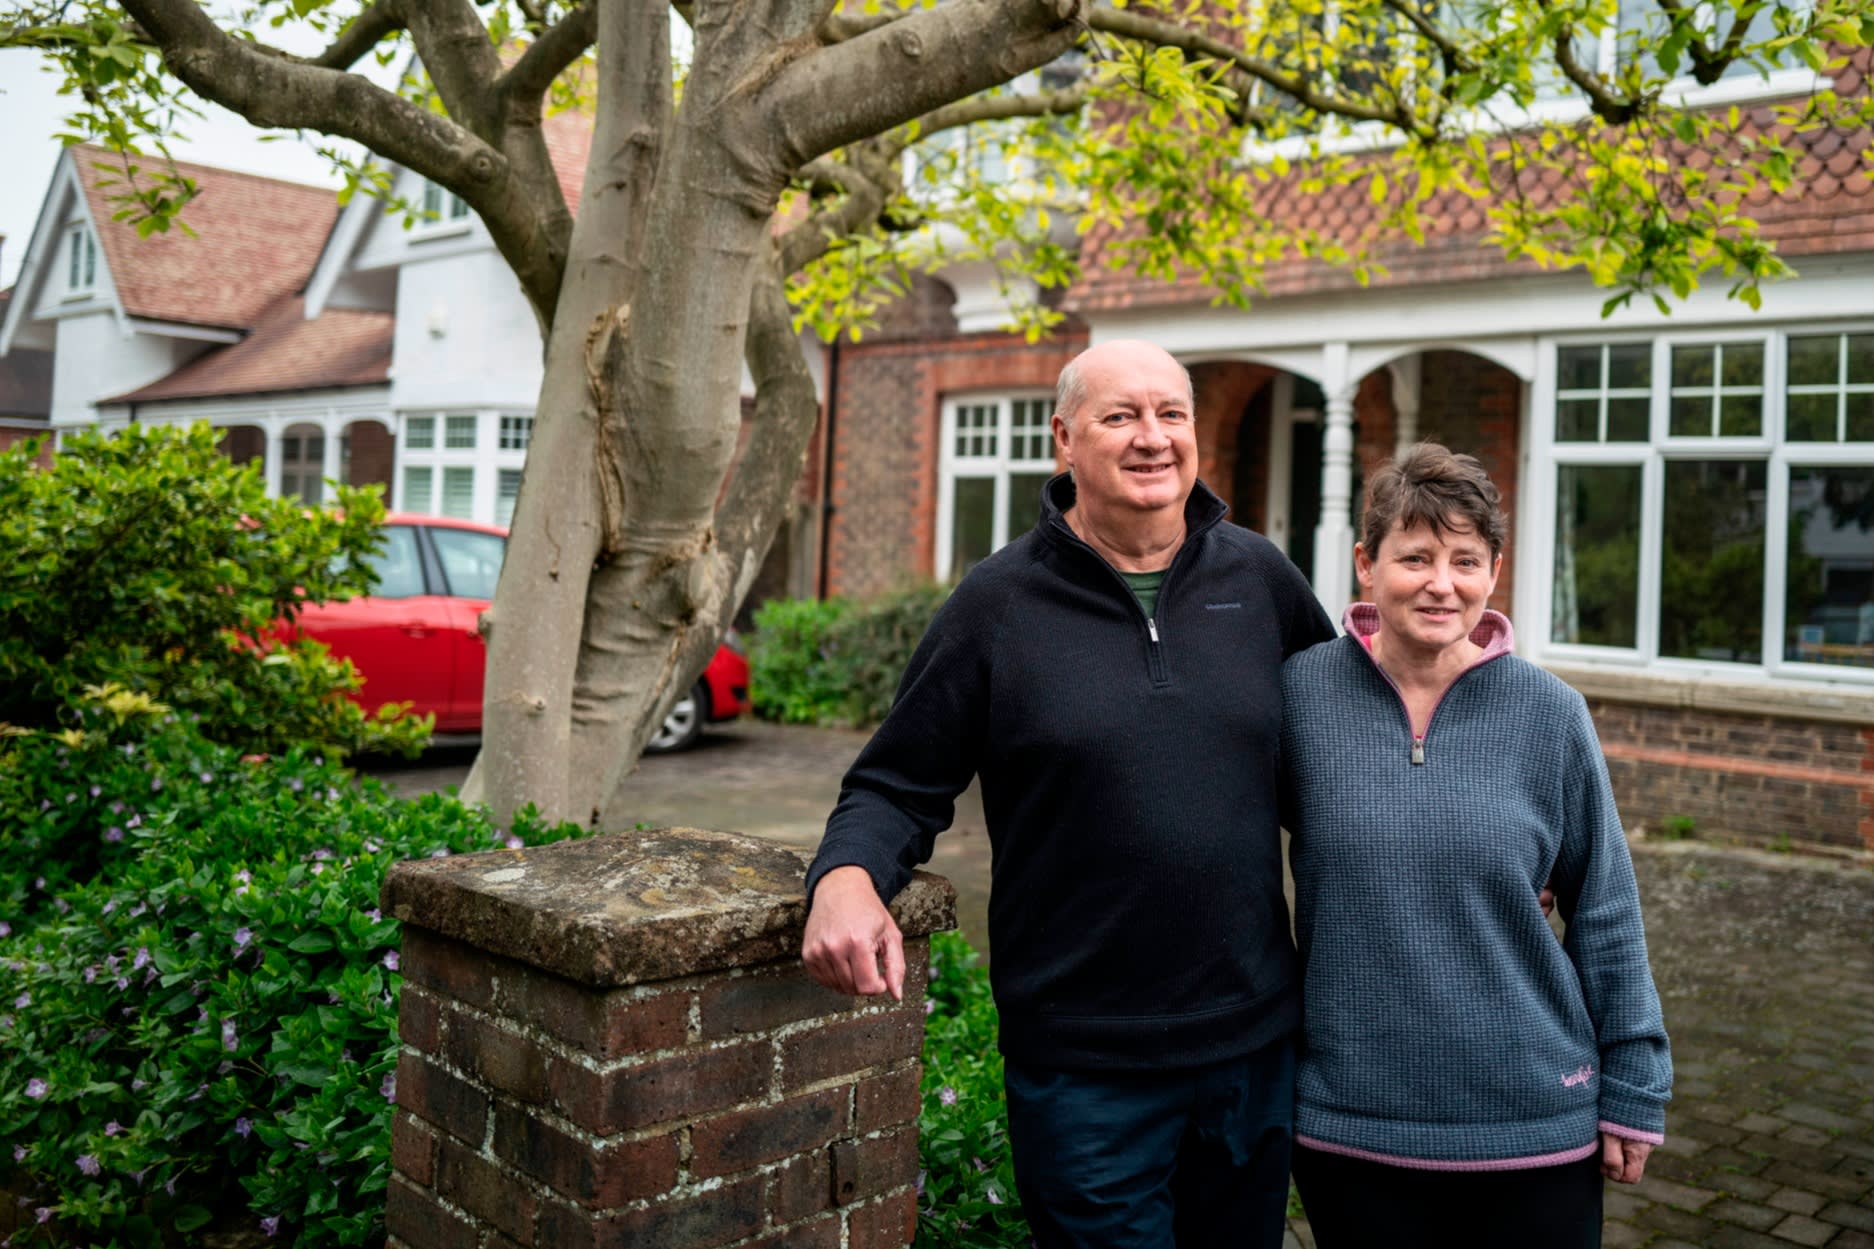 Tony Brent with wife Karen outside their home in Horsham, West Sussex